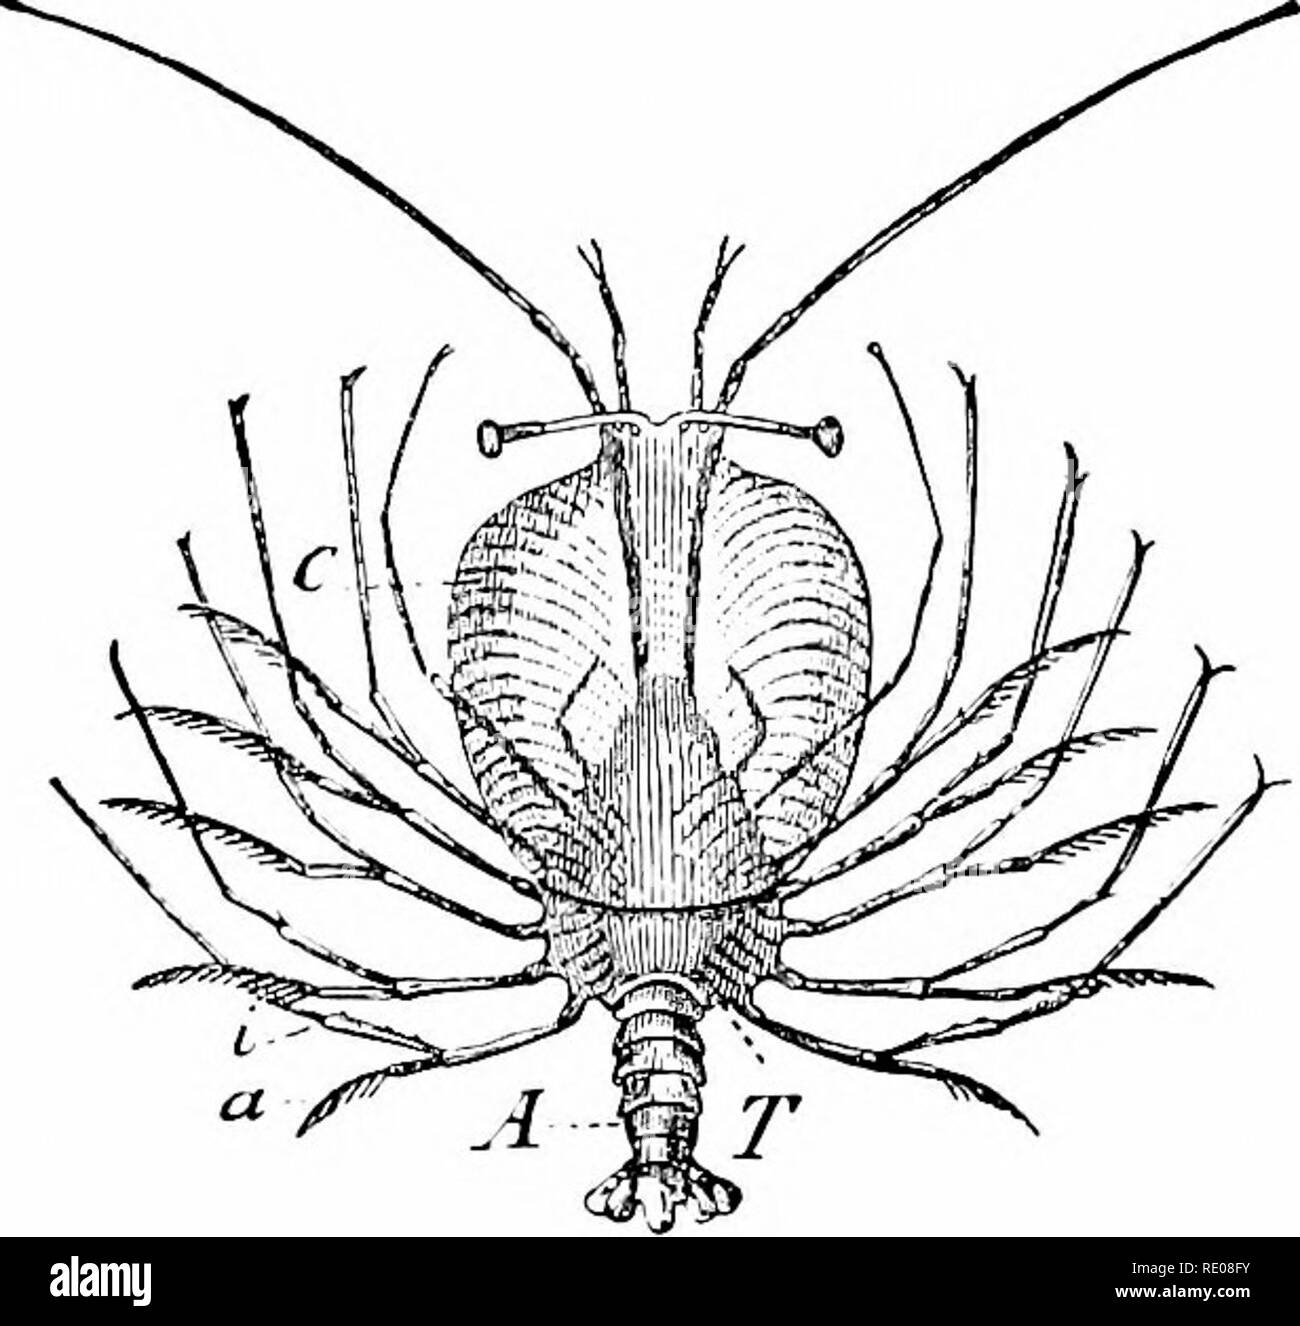 . A manual of zoology. Zoology. 434 ARTIIliOPODA. being united behind, while their ducts remain separate. The structure of the nervous system is in part dependent upon that of the abdomen. In the Macrura (fig. 430, C) the ventral chain consists of six ganglia in the thorax, six in the abdomen, but in the Brachyura (fig. 441) these all flow together in a common mass, connected with the brain by two long esophageal commissures. The development of most decapods is interesting from the number of larval forms. As a rule a zoea (fig. 415) is hatched from the egg ; this passes next into a Mysis-stage Stock Photo